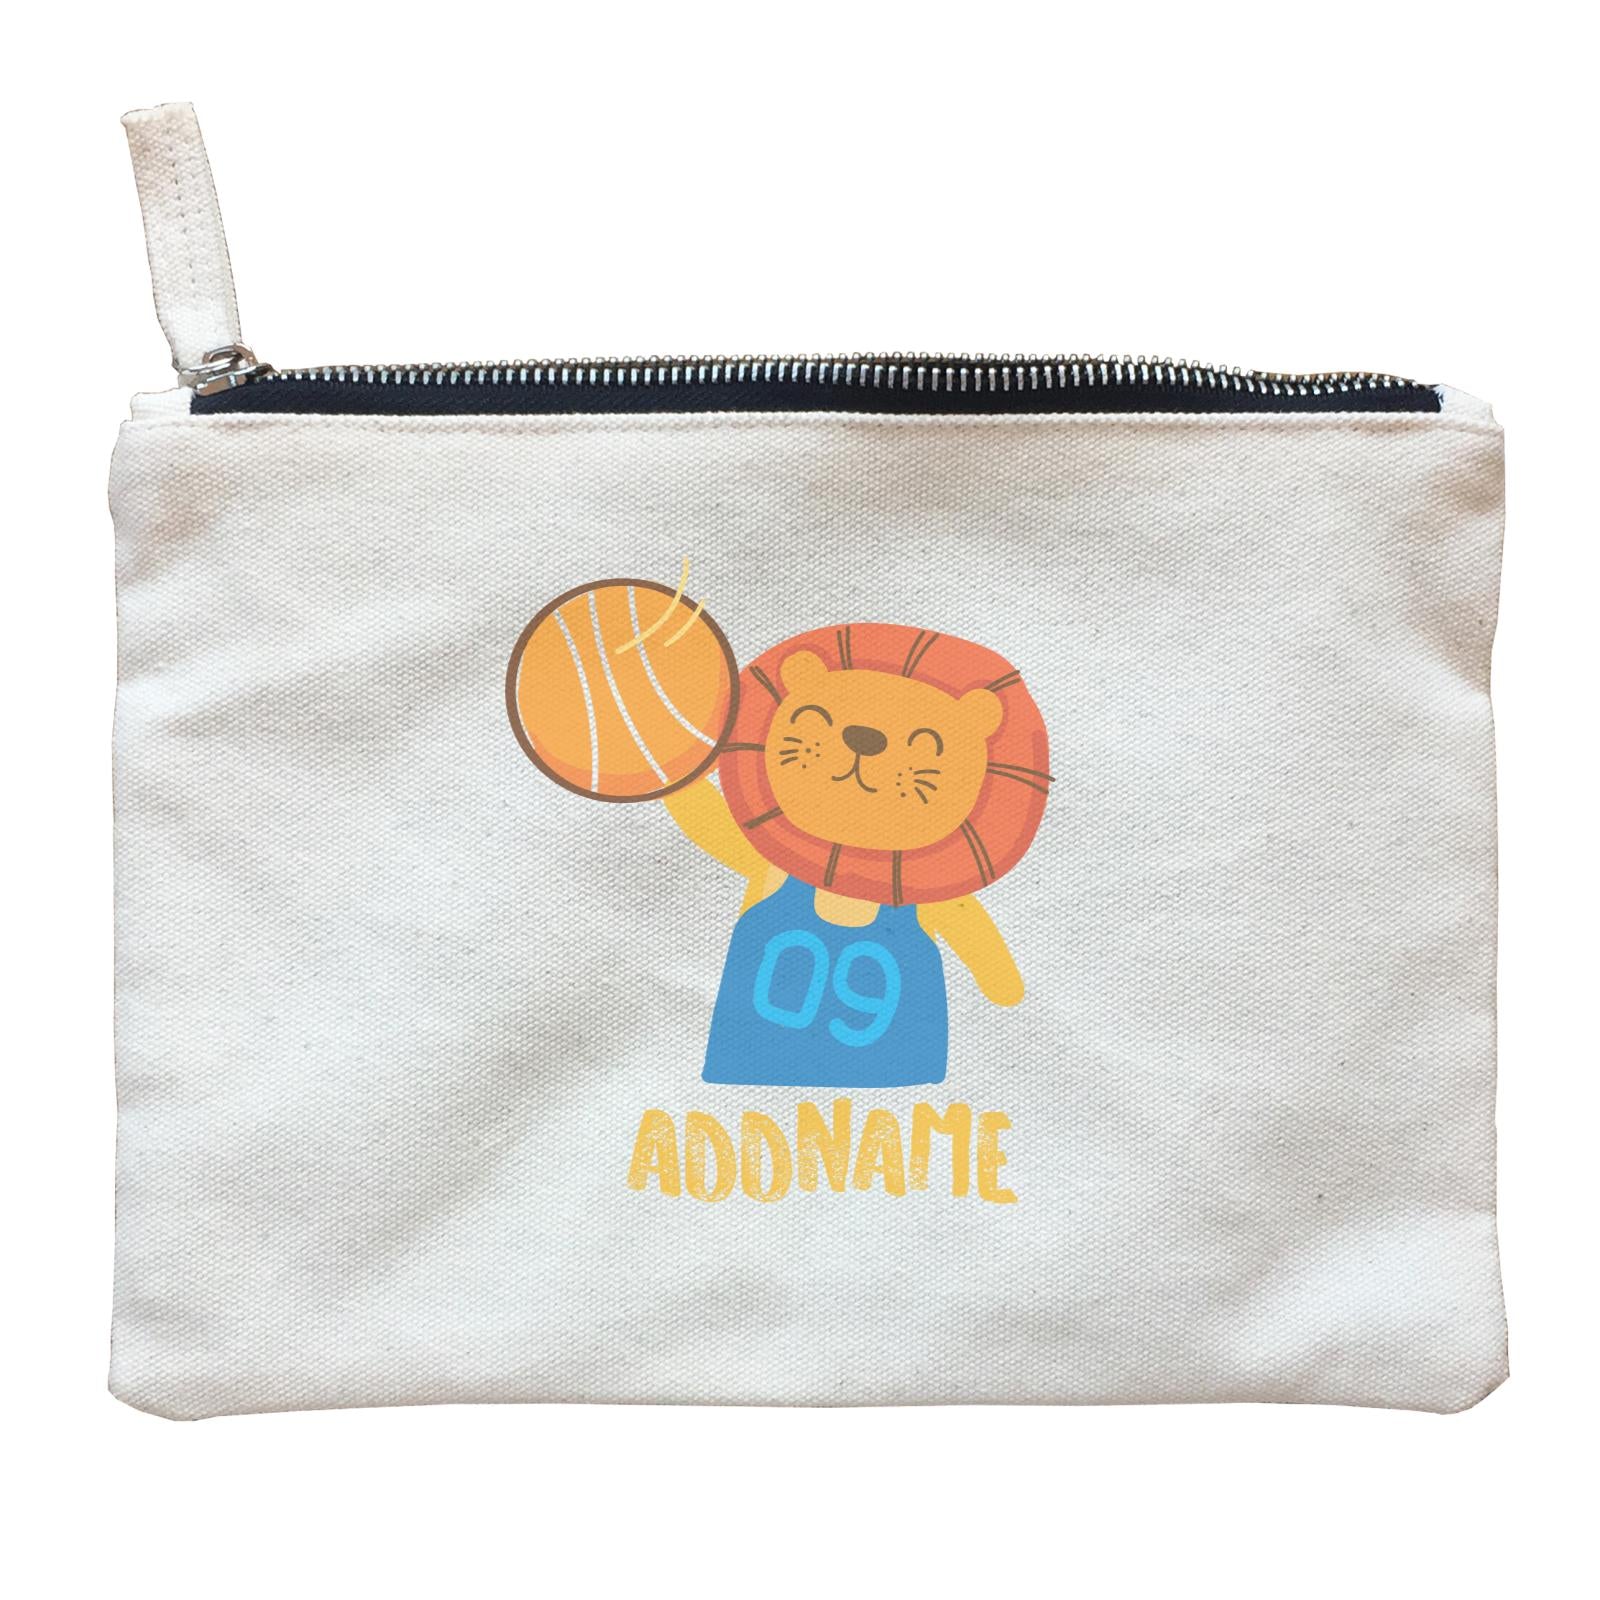 Cool Cute Animals Lion Basketball Player Addname Zipper Pouch